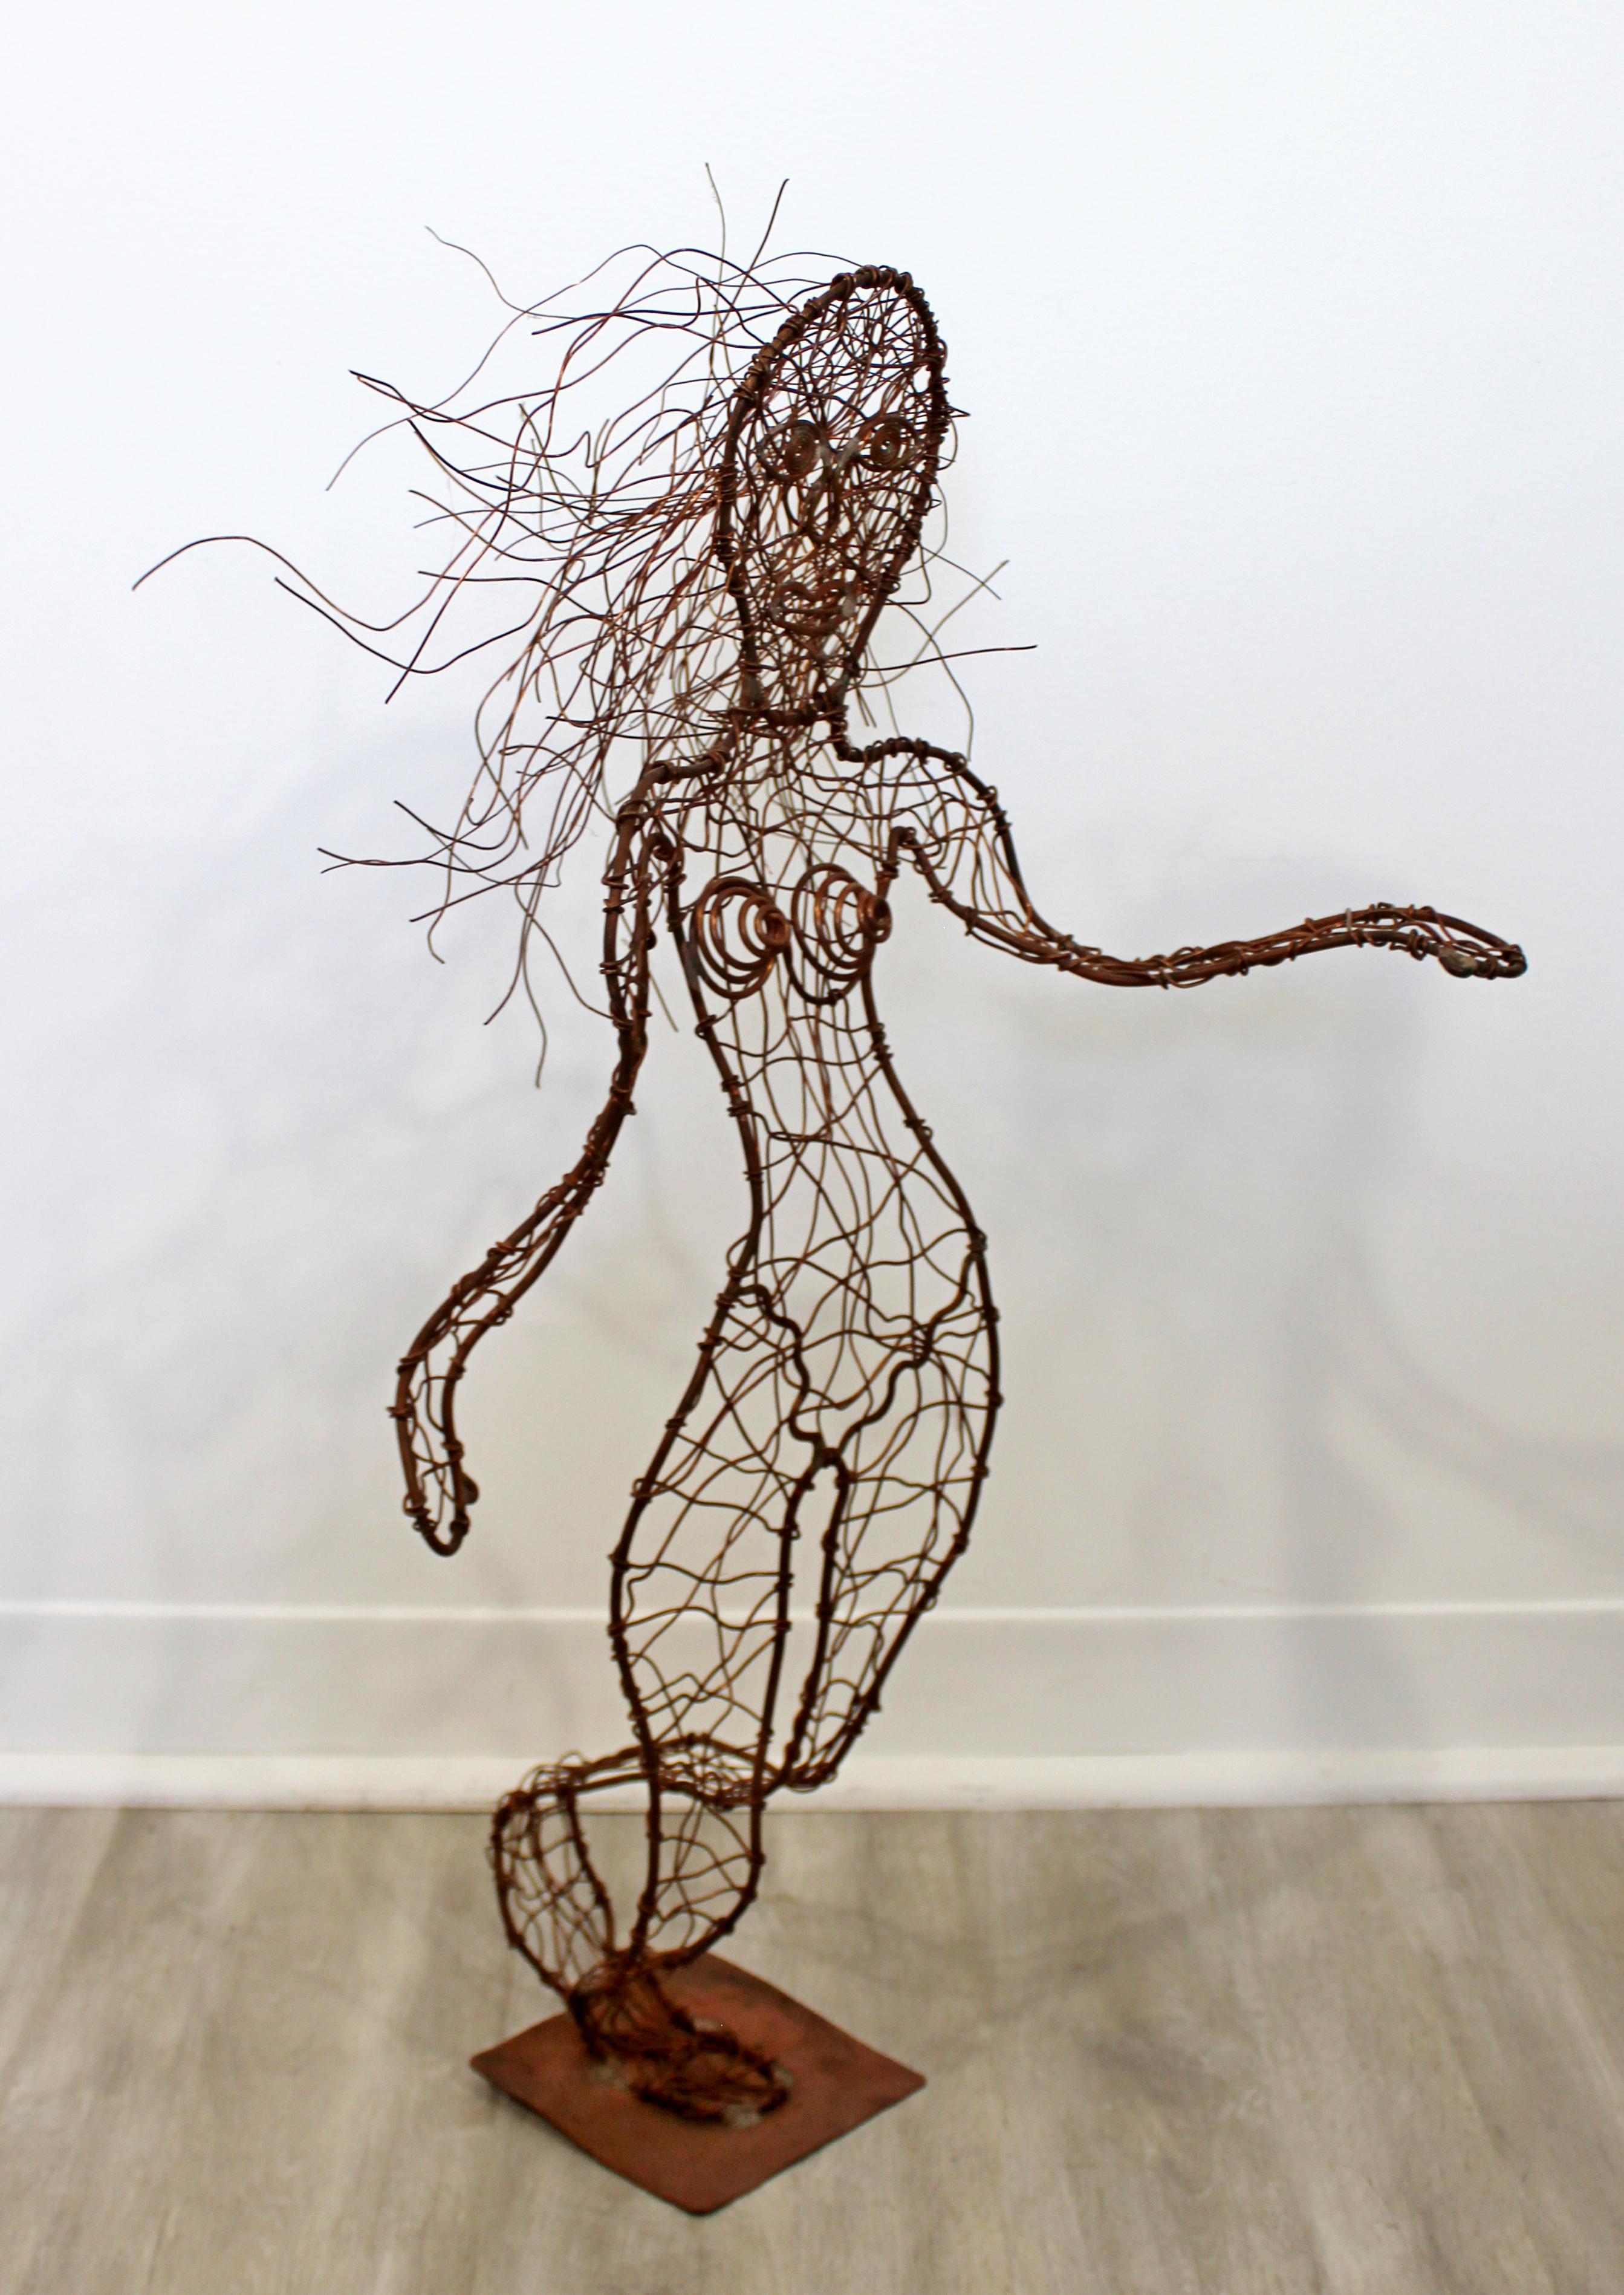 For your consideration is a whimsical, forged copper metal wire sculpture of a nude woman, by Robert D. Hansen. In excellent condition. The dimensions are 13